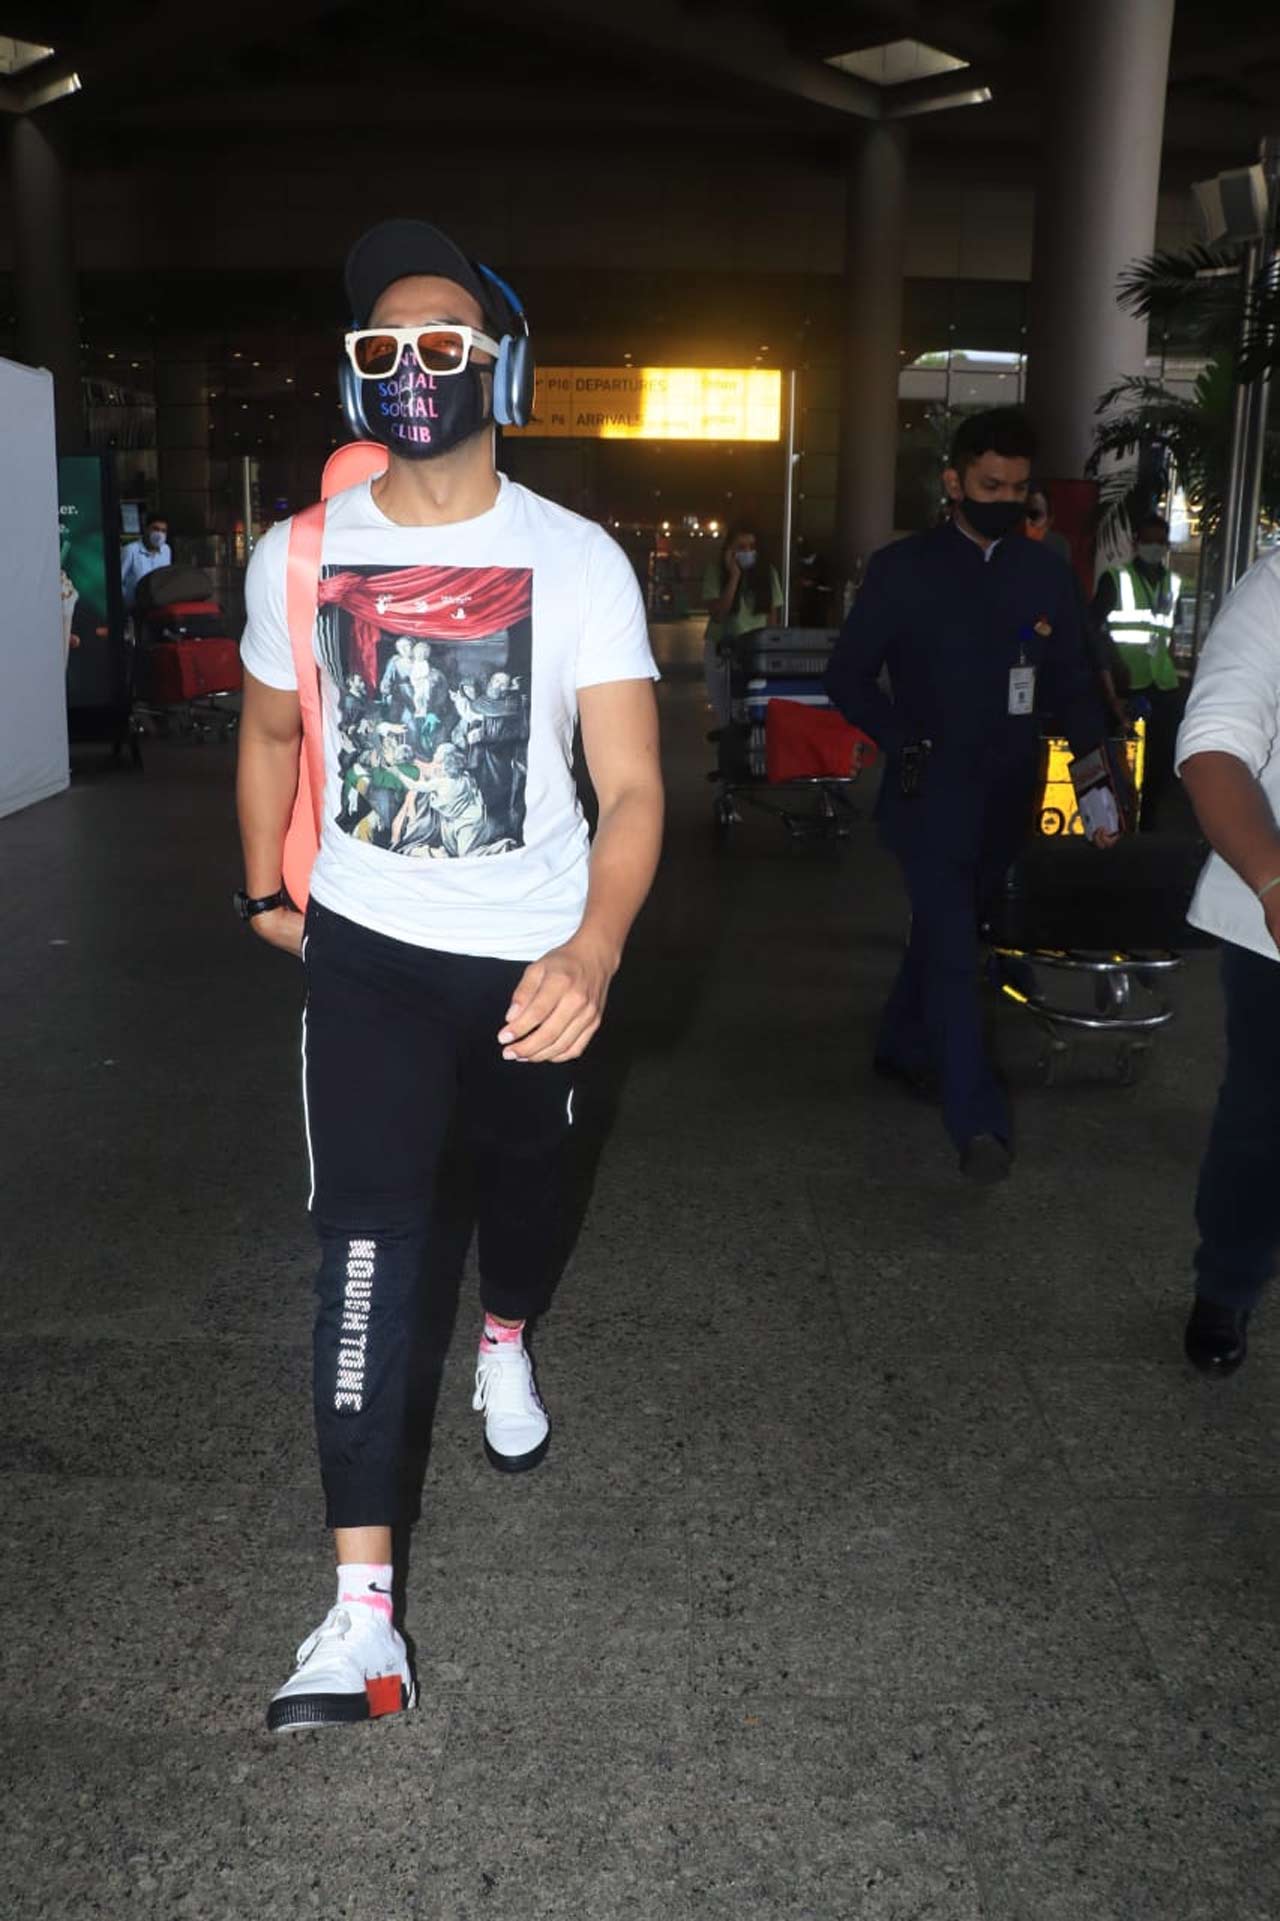 Aparshakti Khurana, who is all set to embrace parenthood with wife Akriti, was also snapped at the Mumbai airport.